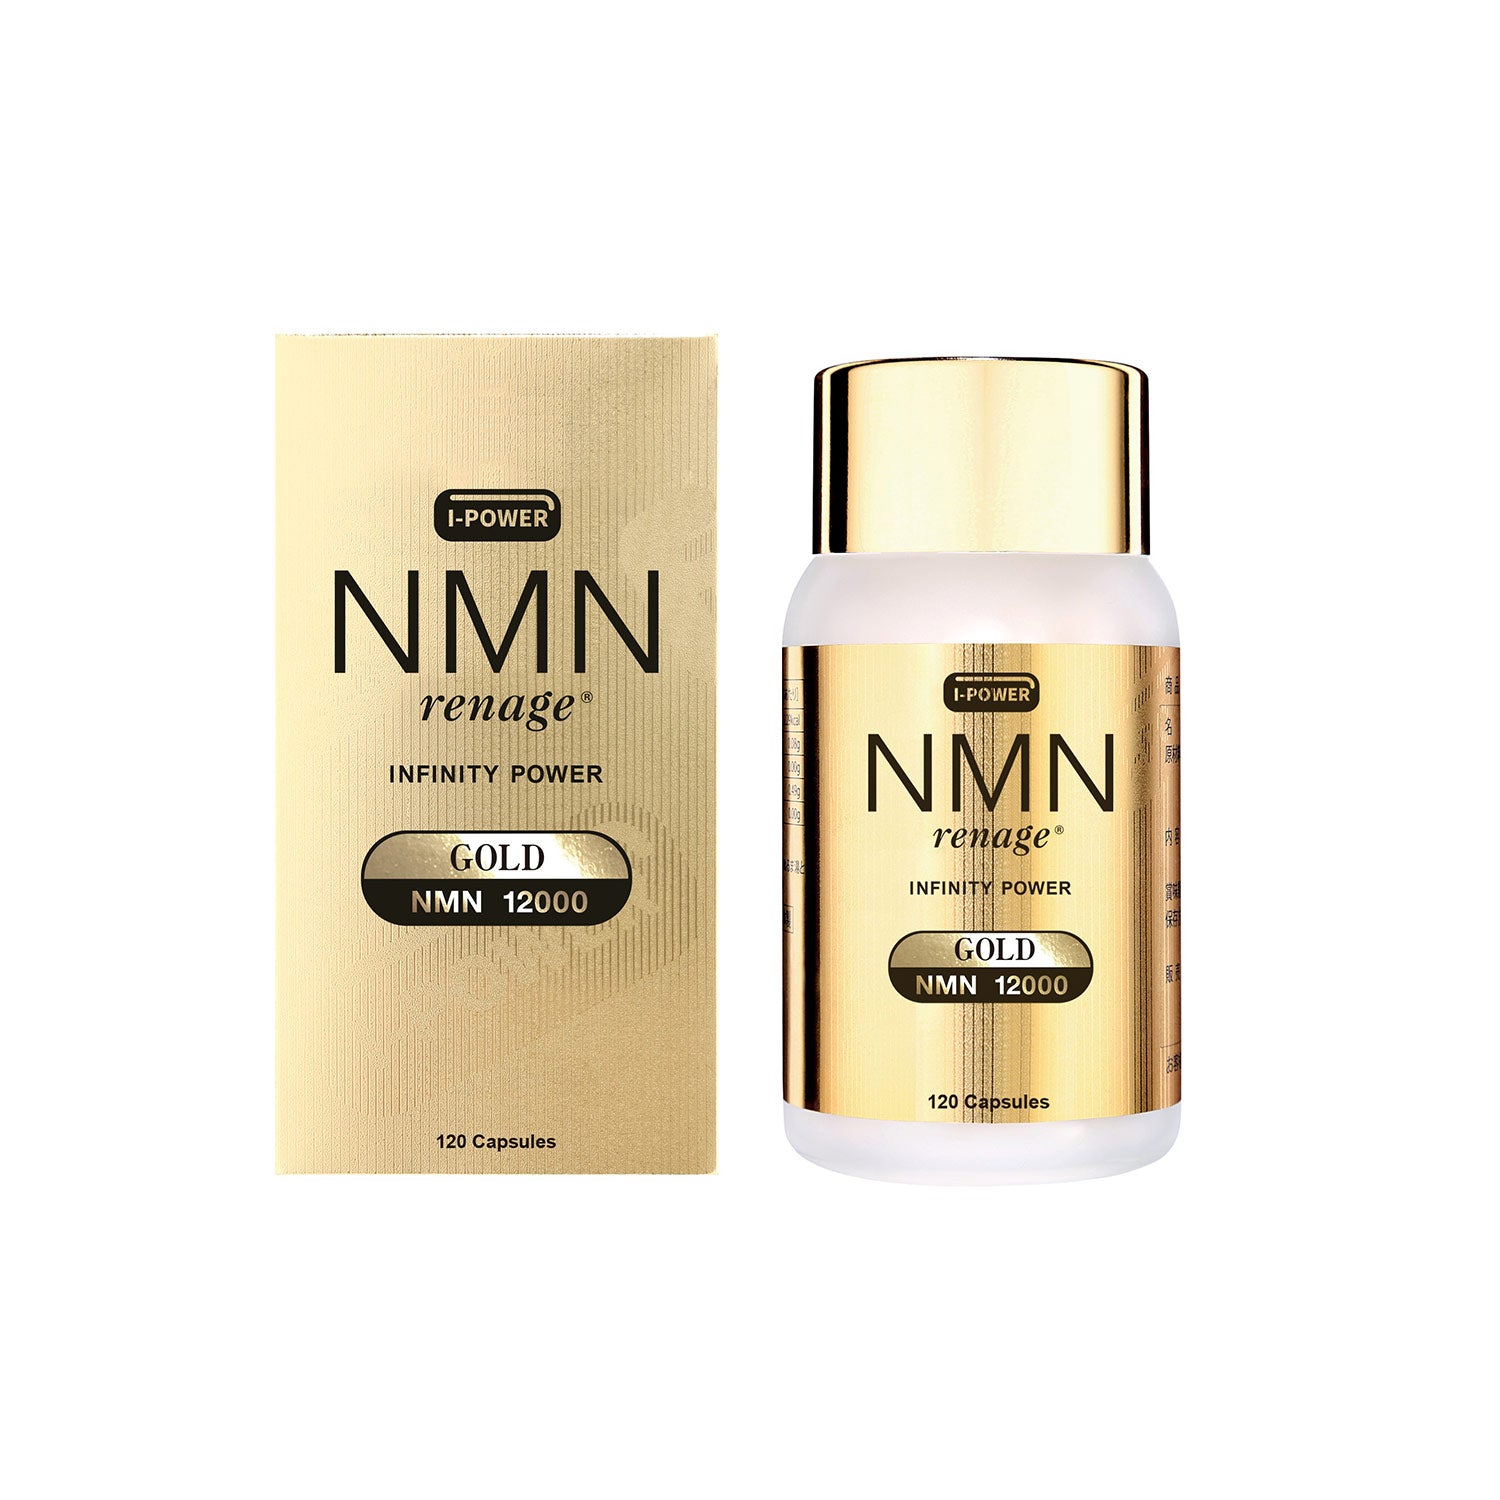 NMN renage GOLD 12000 Infinity Power 120capsules 30days – Tokyo on 